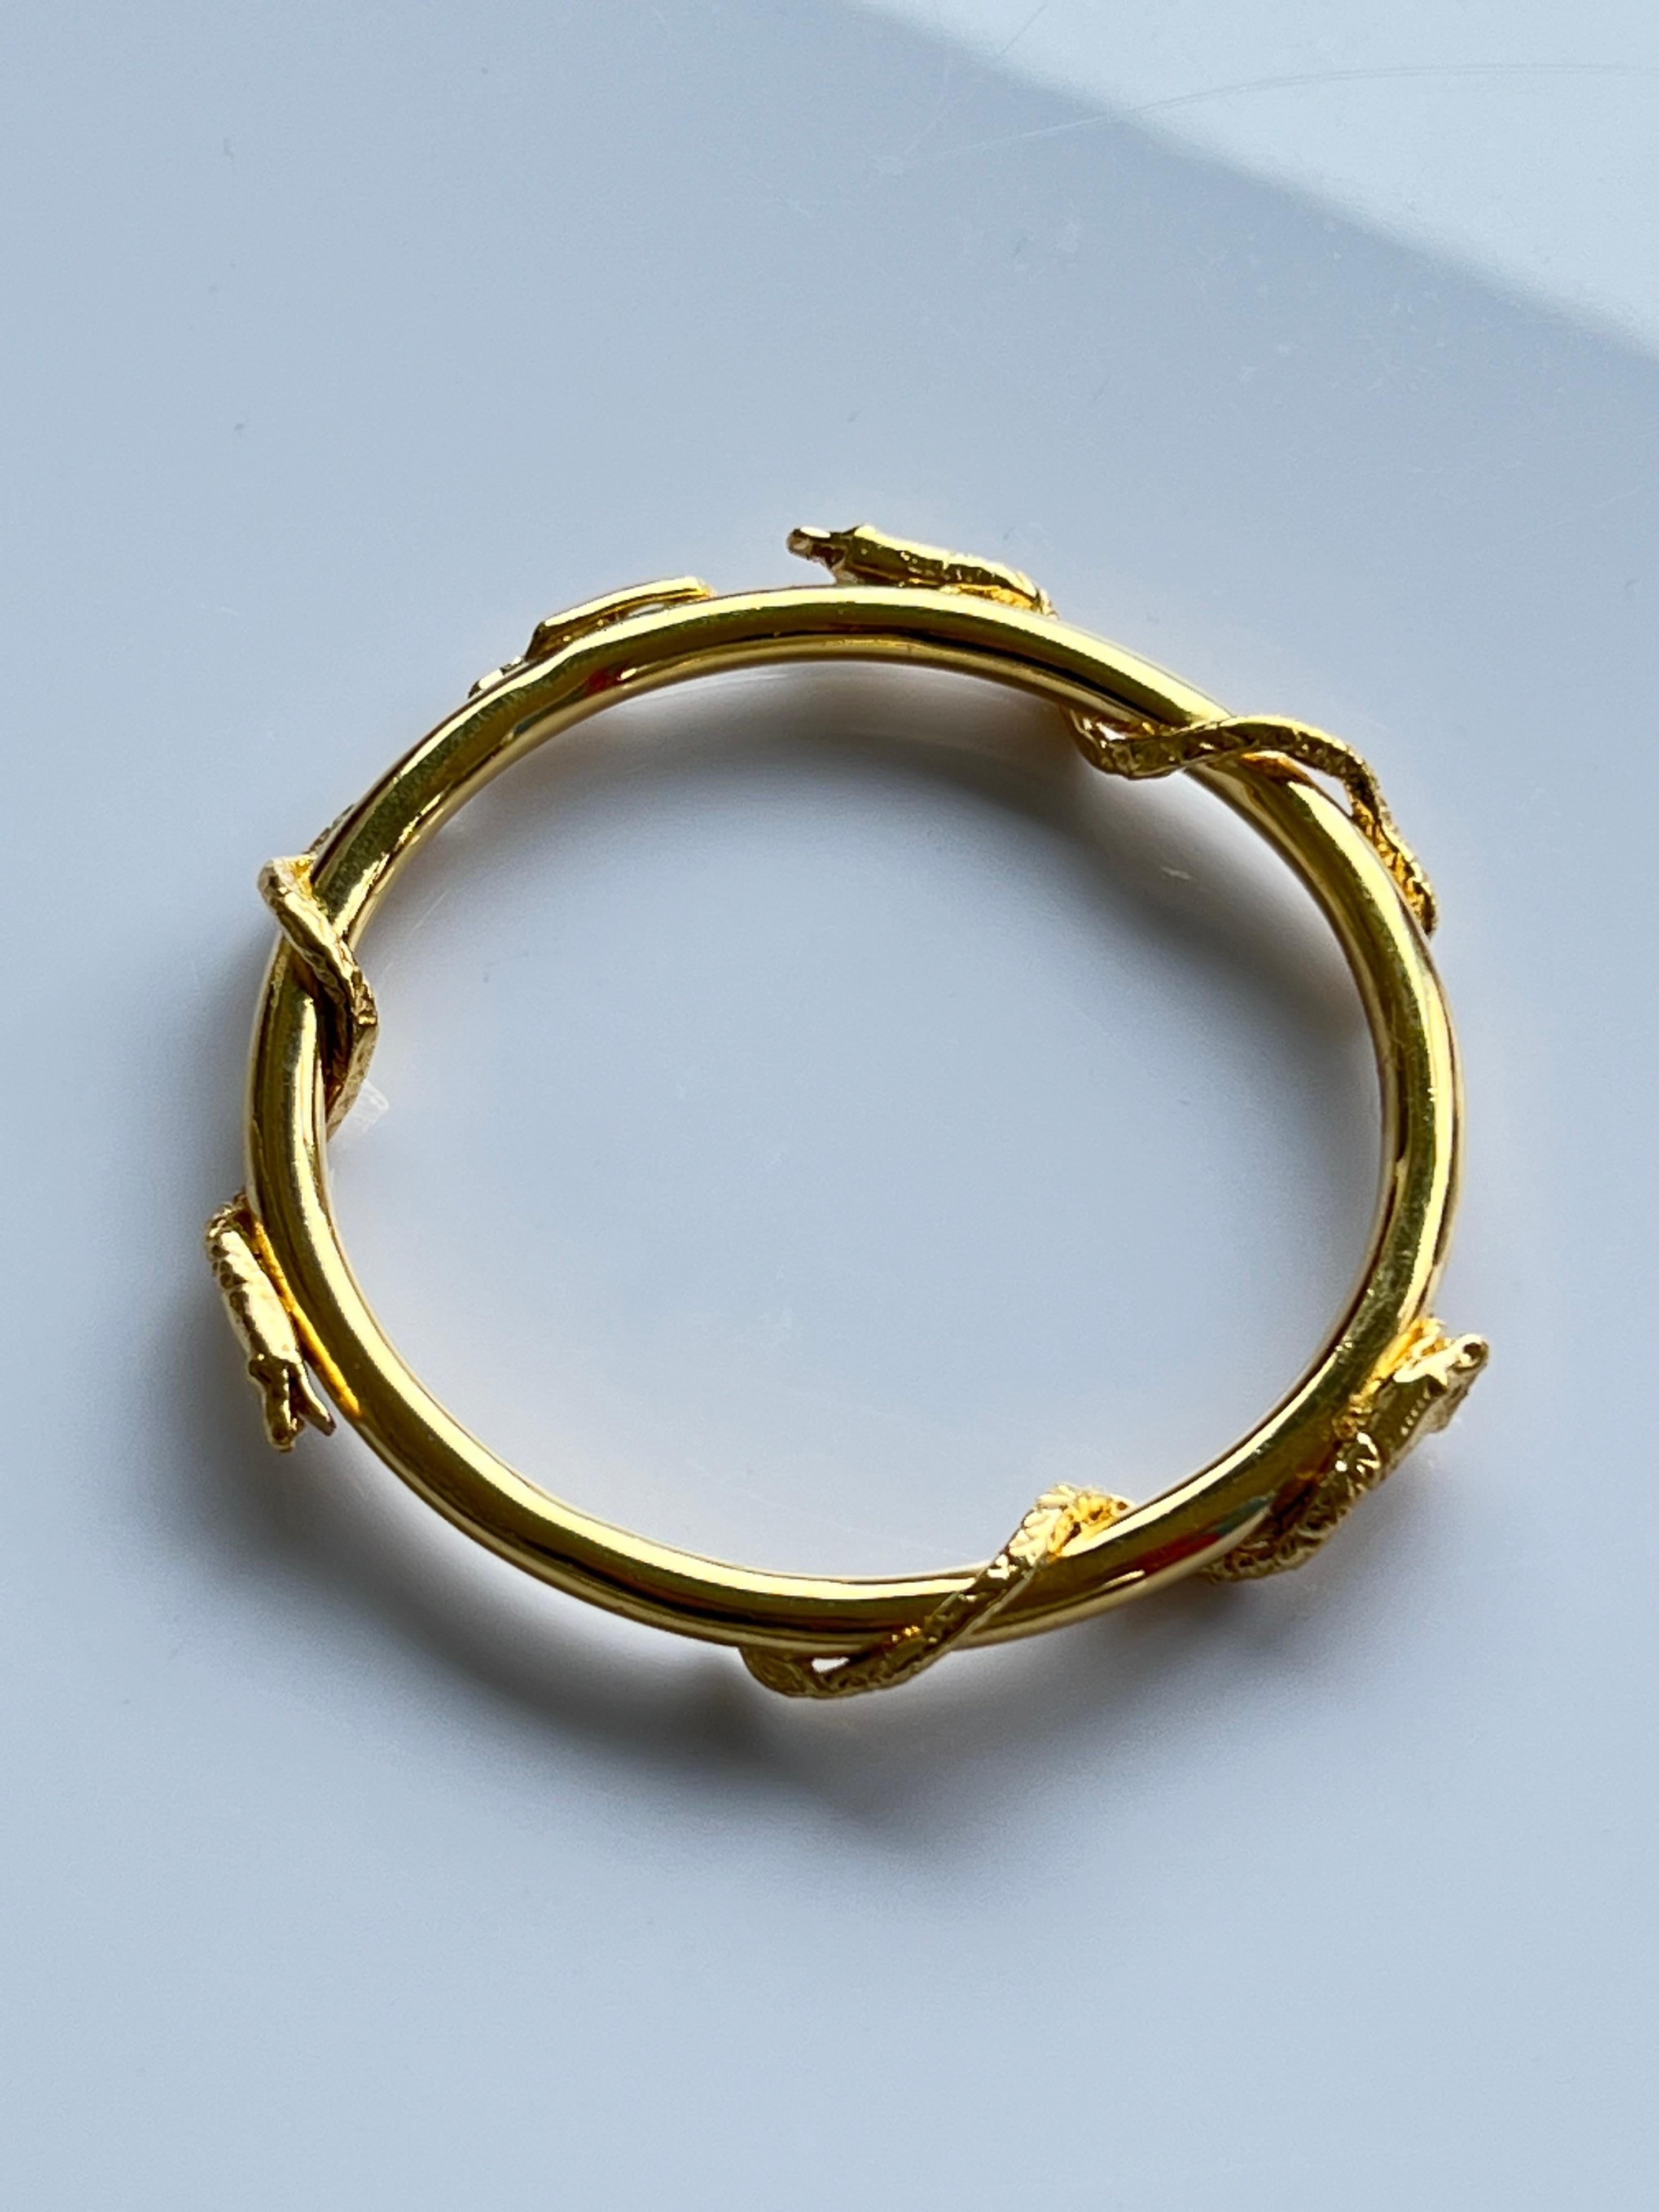 Women's Snake Bangle Bracelet Victorian Style Gold Plated J Dauphin For Sale